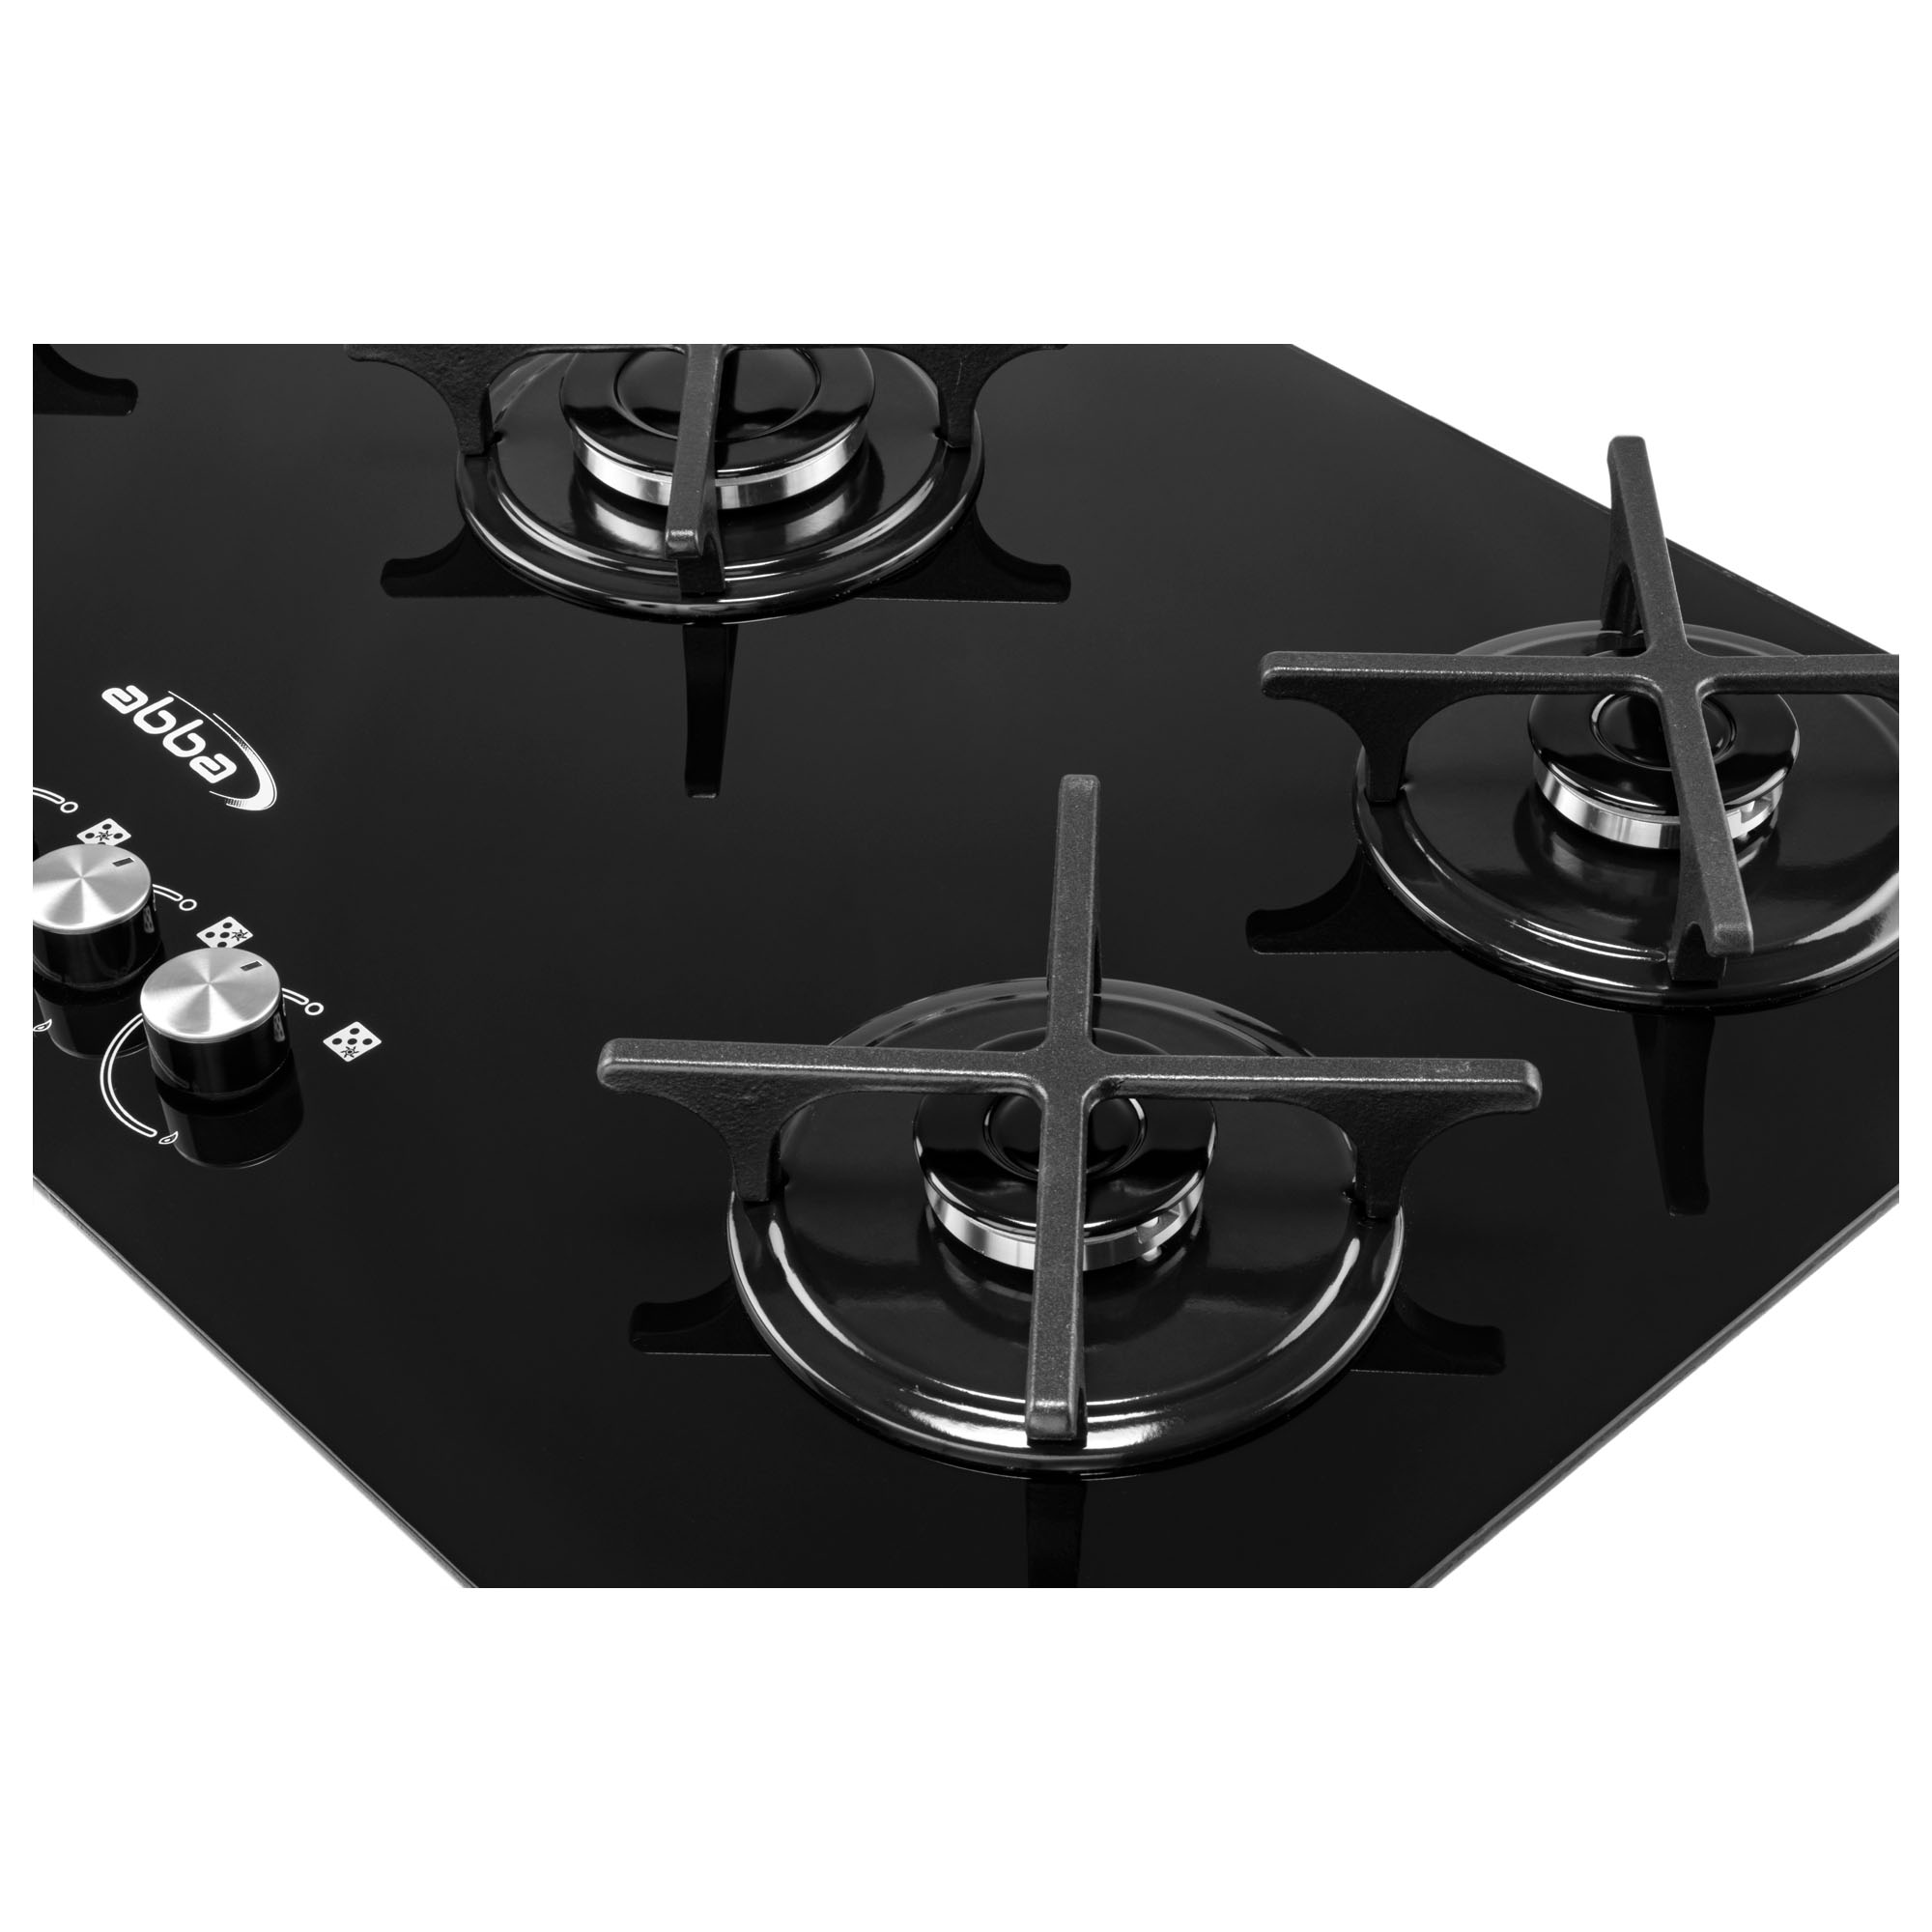 ABBA 36 Gas Cooktop with 5 Sealed Burners - Tempered Glass Surface with  SABAF Burners, Natural Gas Stove for Countertop, Home Improvement  Essentials